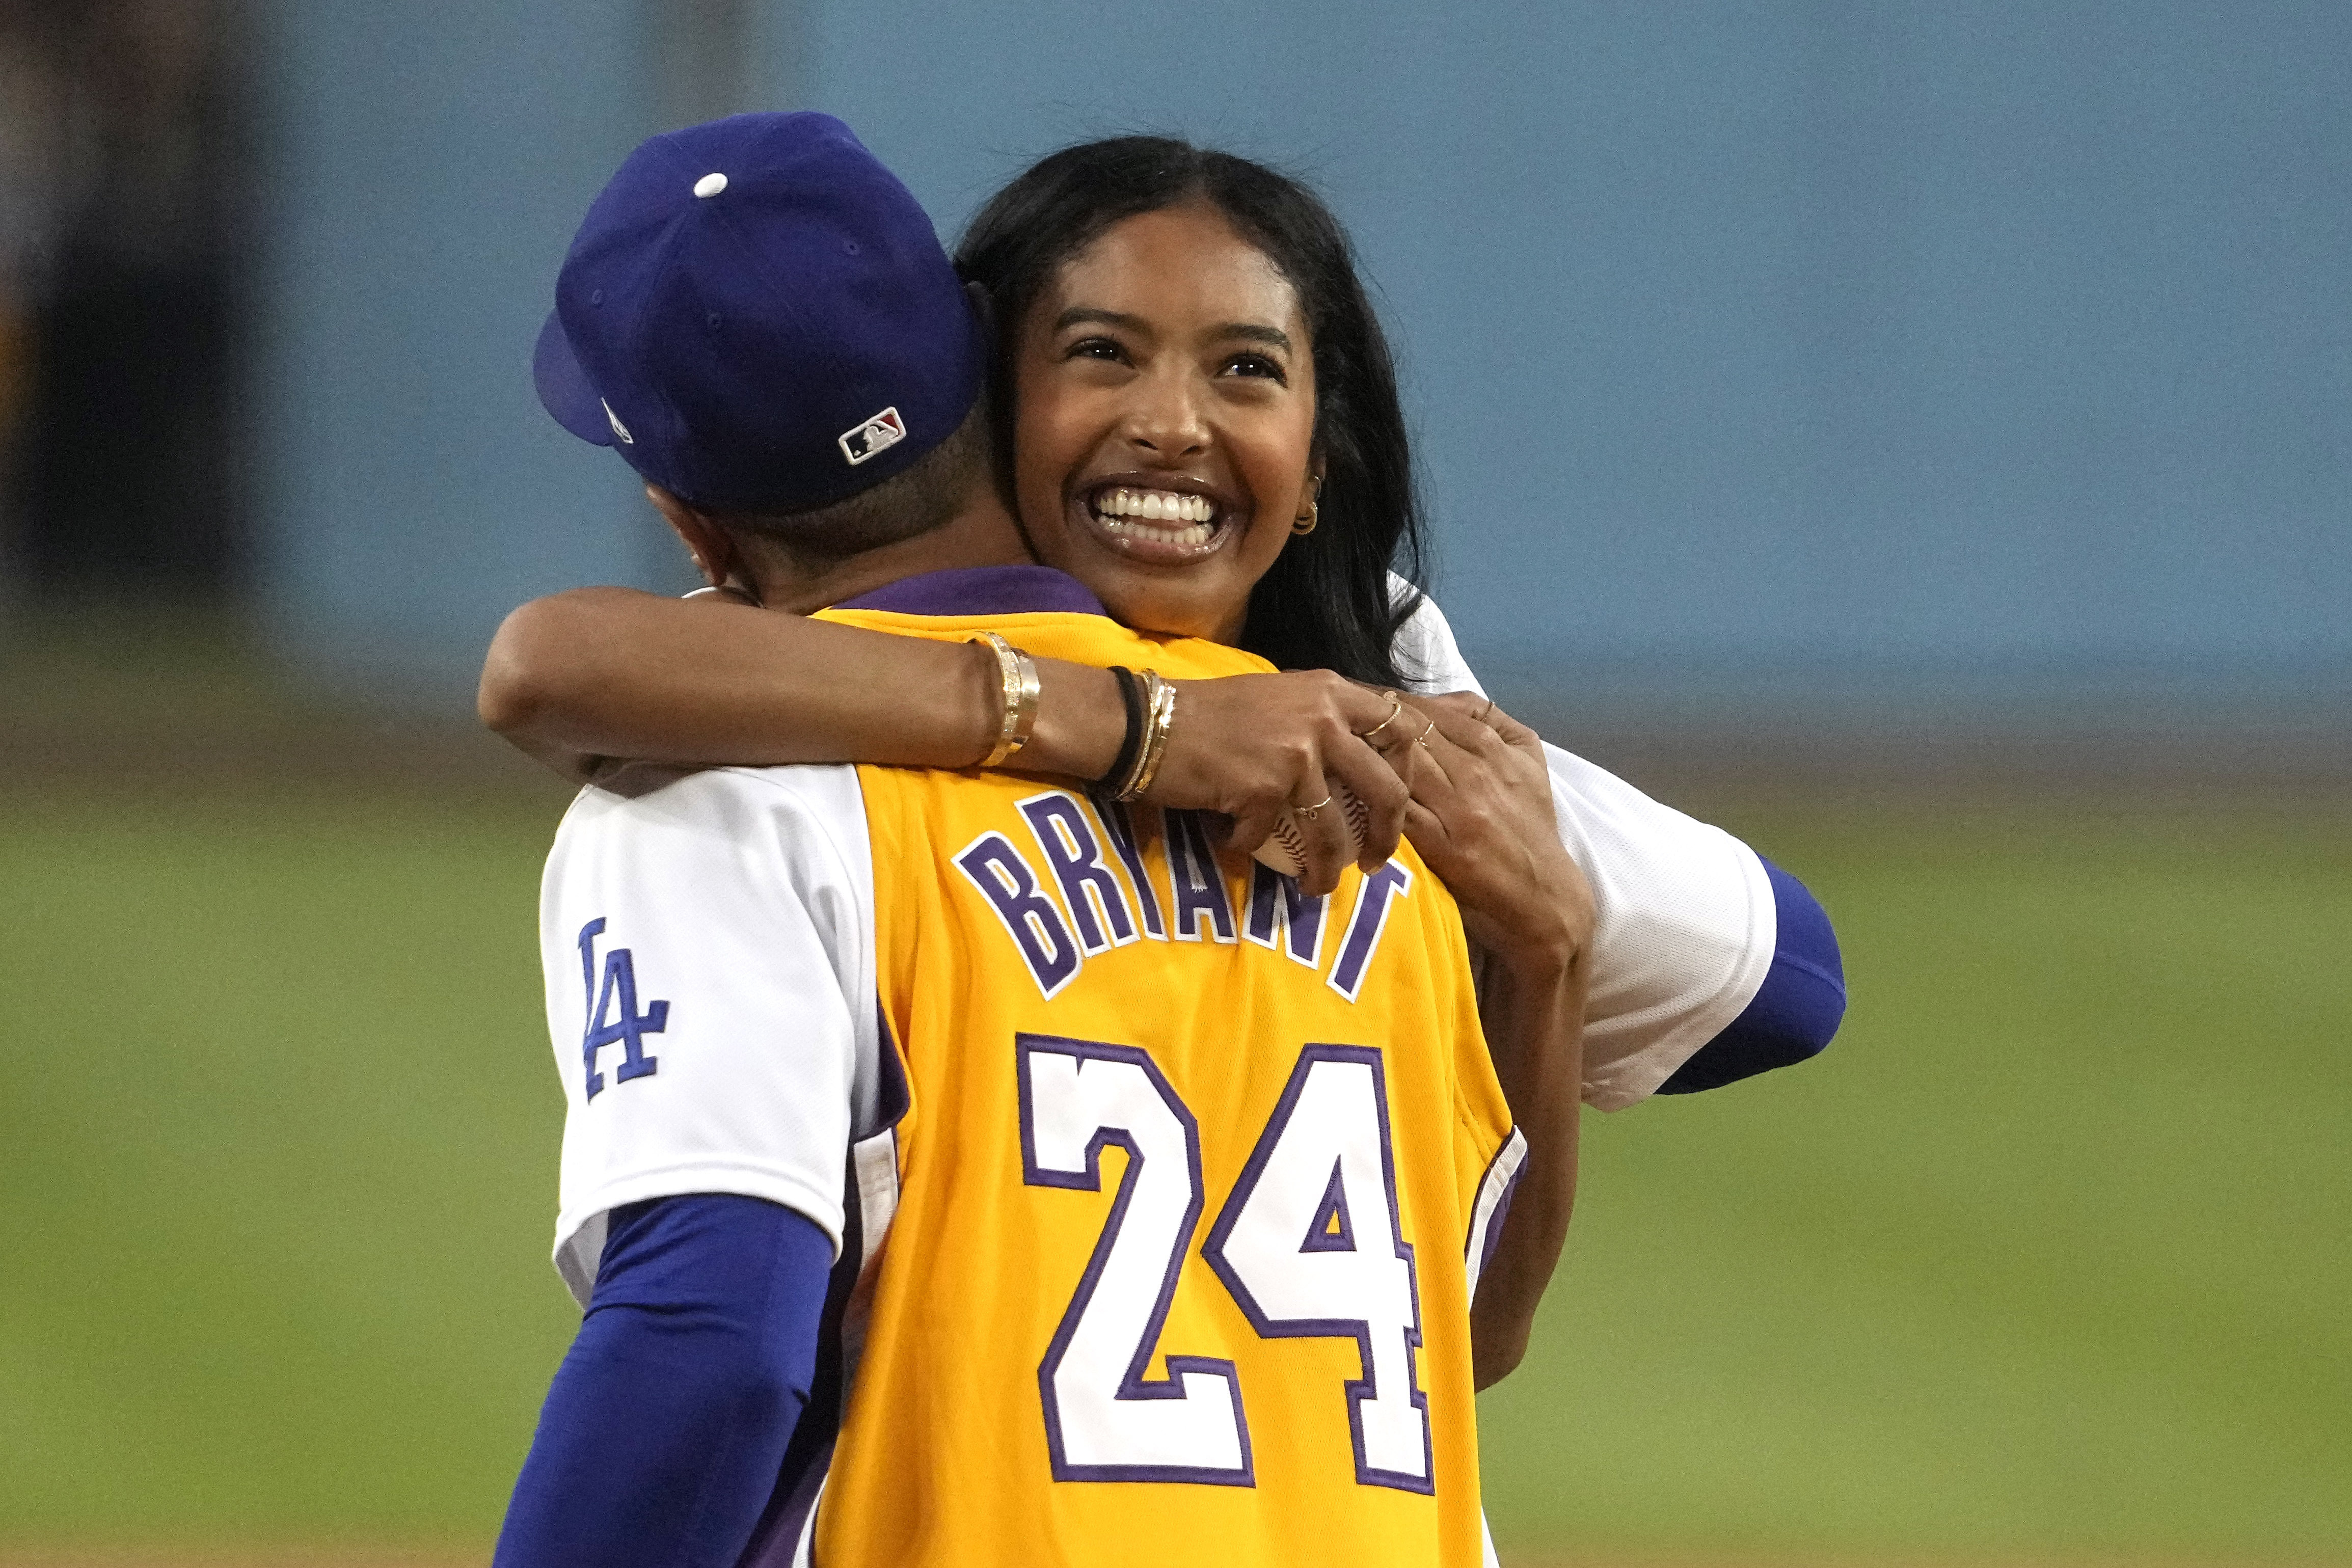 Dodgers to honor Kobe Bryant with 'Black Mamba' jerseys on Lakers Night 